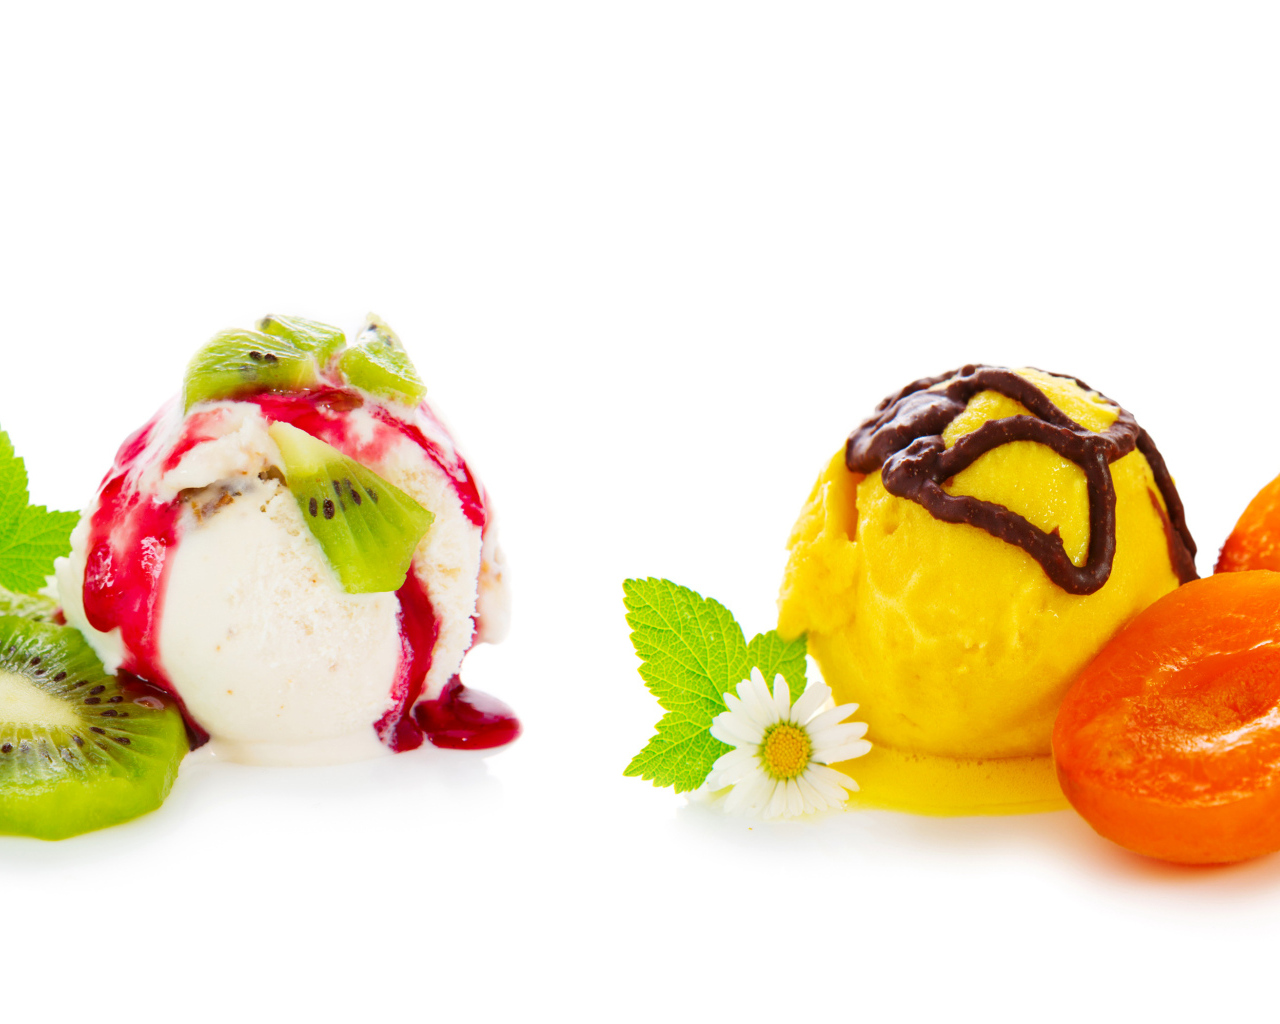 Ice cream balls with kiwi and apricots on a white background